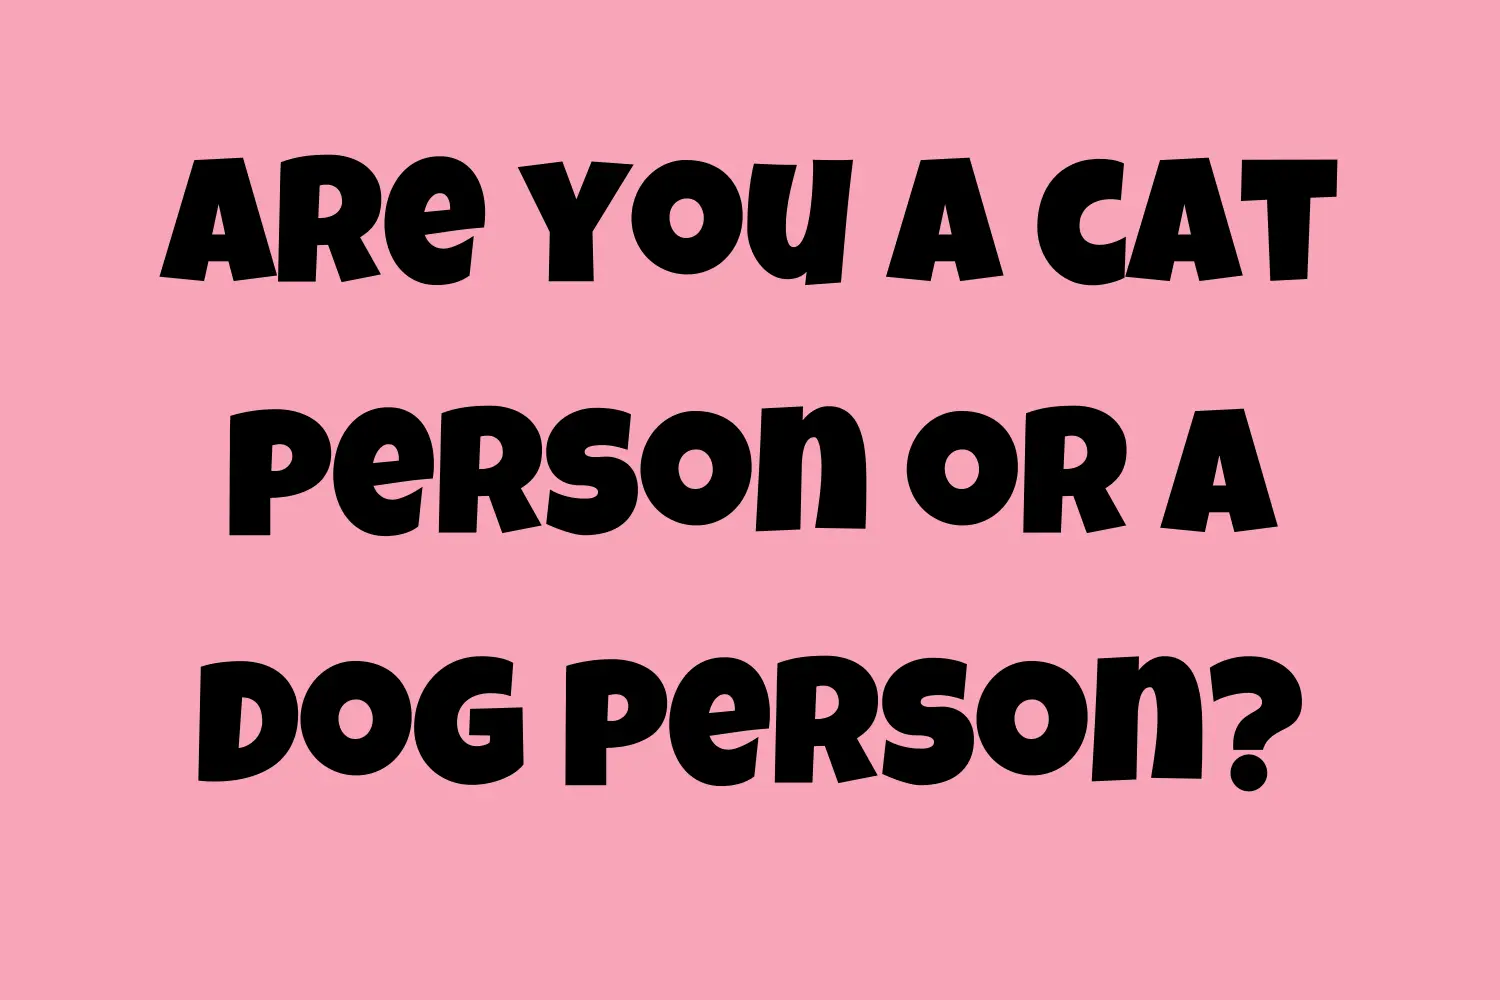 Are you a cat person or a dog person